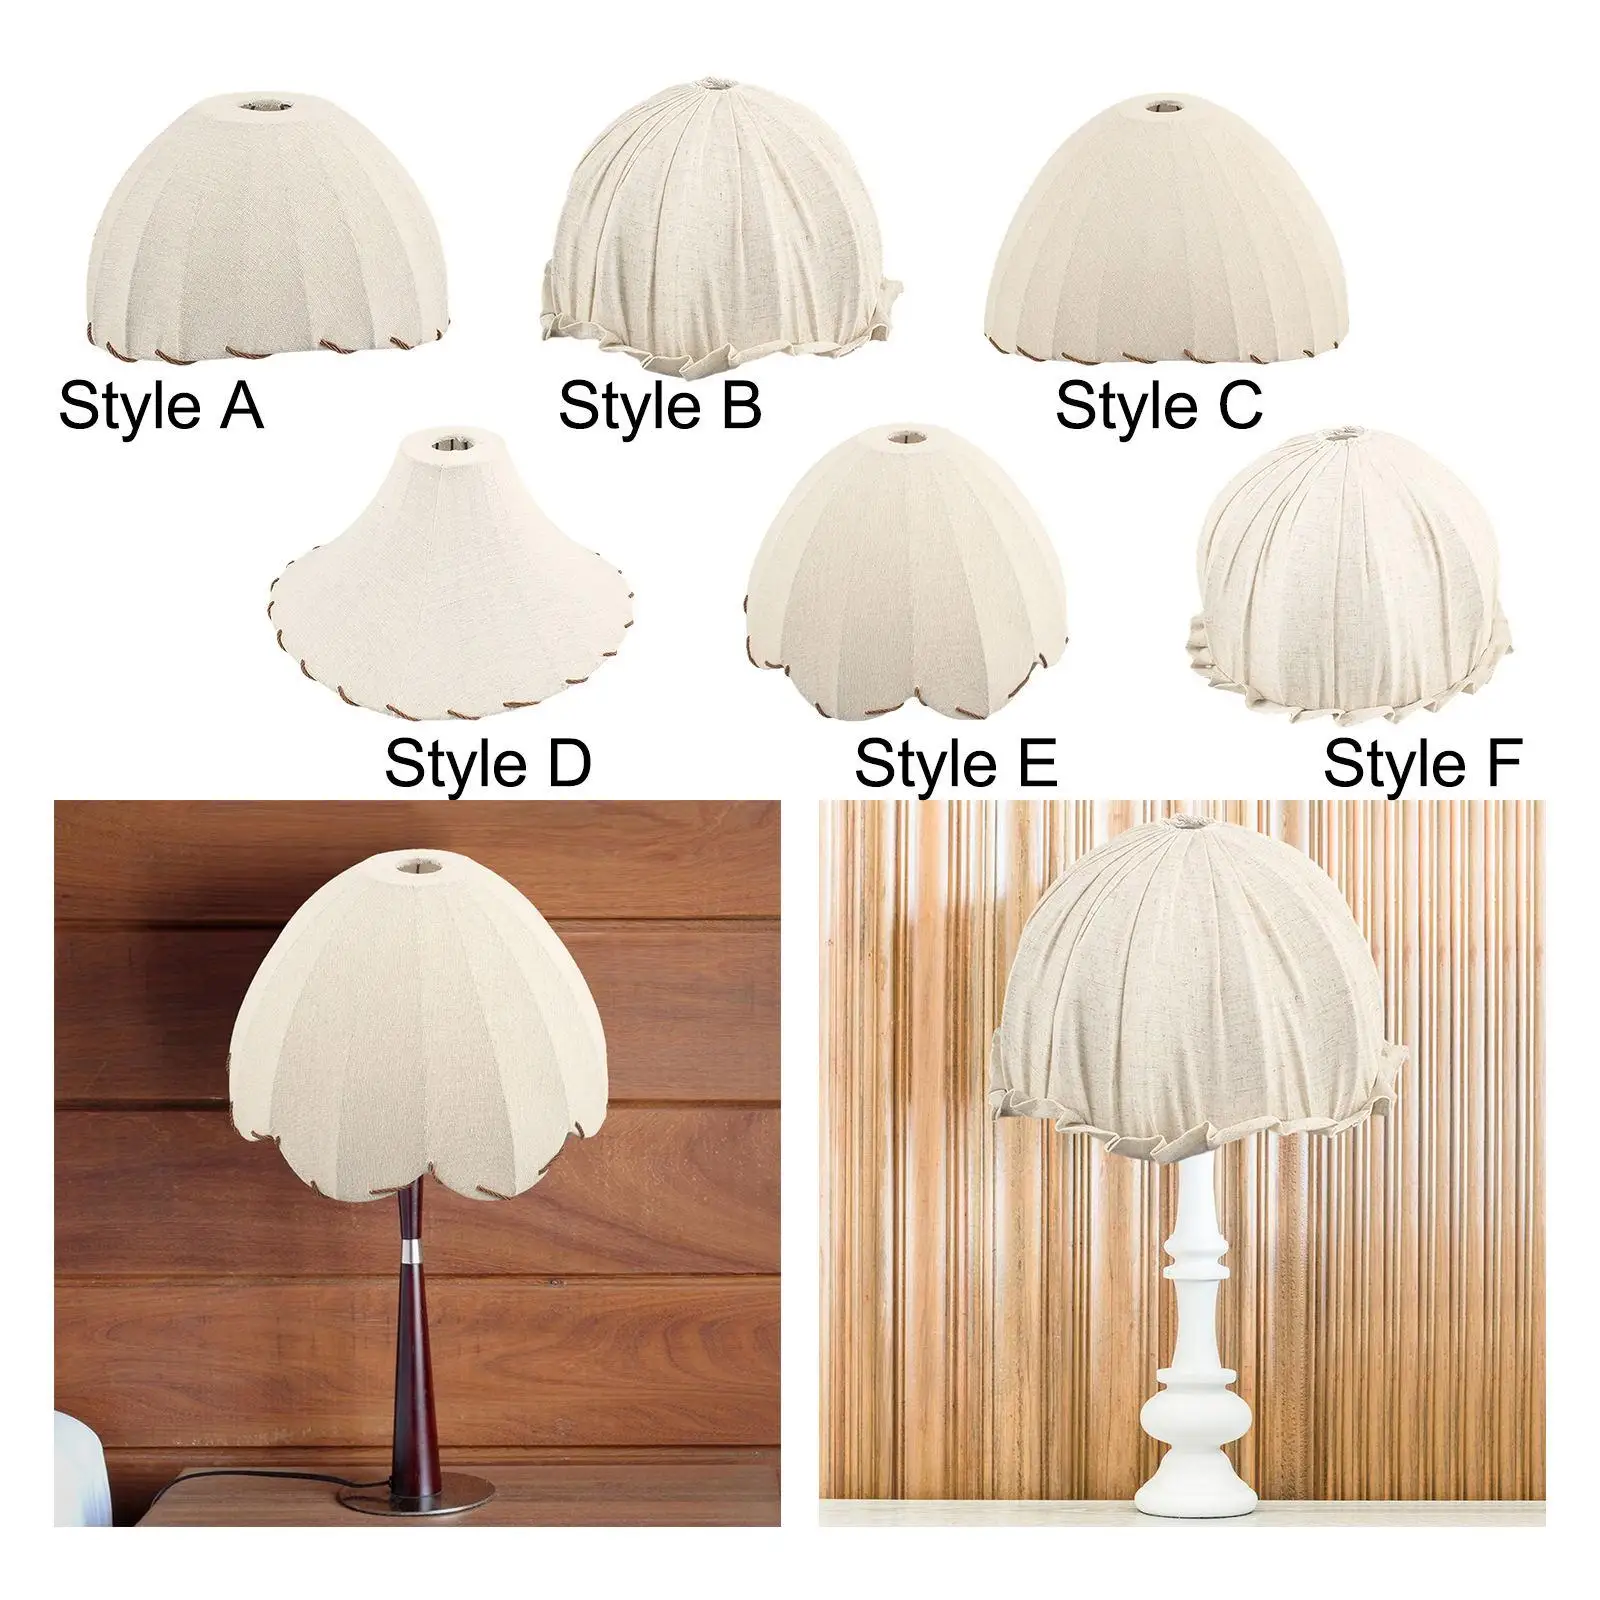 Floor Light Fixture Cover Decorative Modern Lightweight Table Lamp Shade for Hotel Dorm Study Room Apartment Home Decor